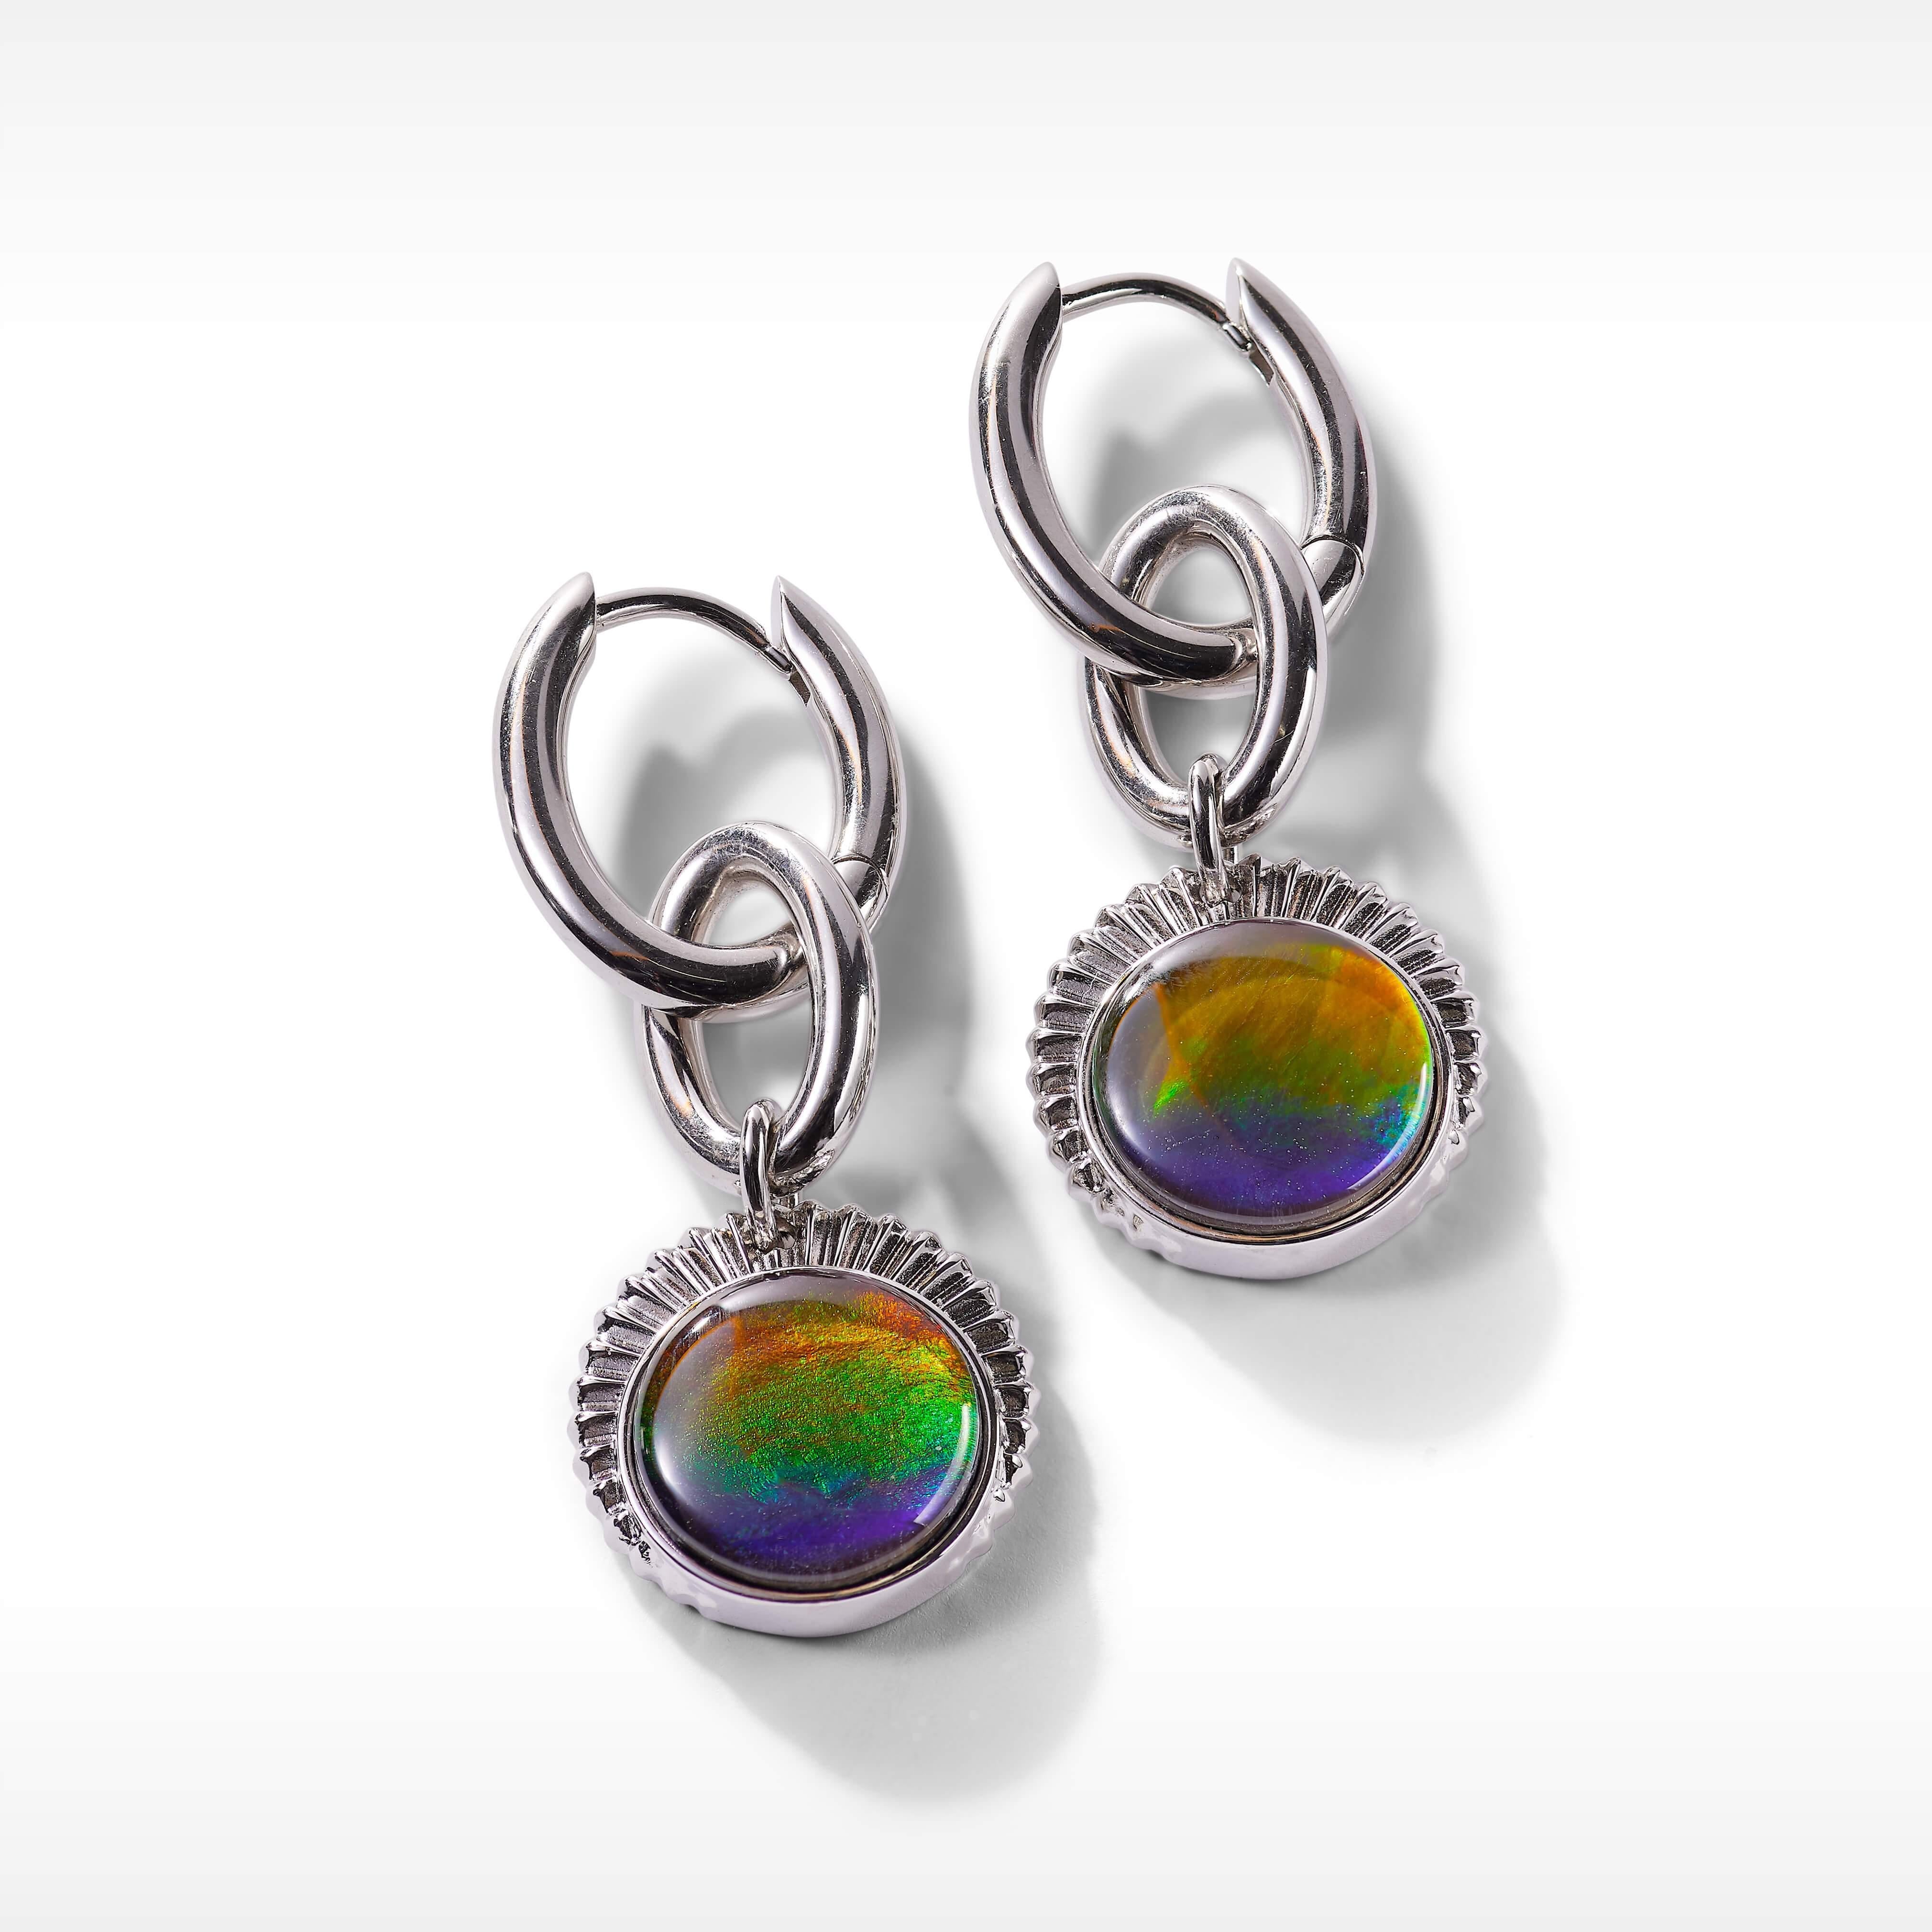 Product Details:

The Origins collection features bold Ammolite showpieces highlighting organic textures inspired by our ammonite roots.

AA grade Ammolite
12mm round Ammolite chain link earrings
925 Sterling Silver
Charm dimensions: 16.3mm x